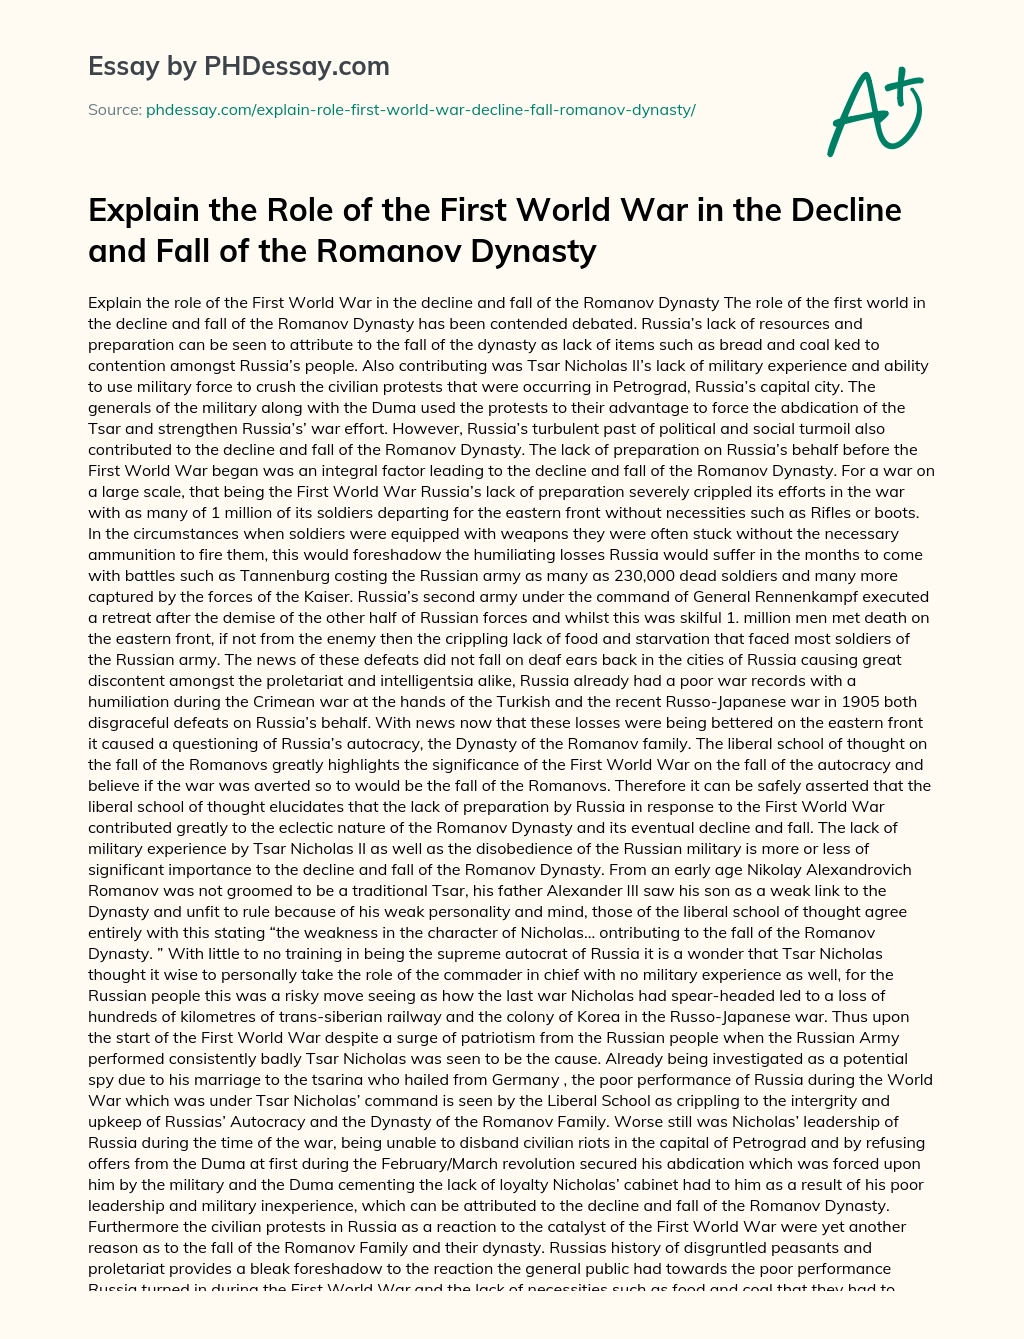 The Role of WWI in the Decline and Fall of the Romanov Dynasty essay